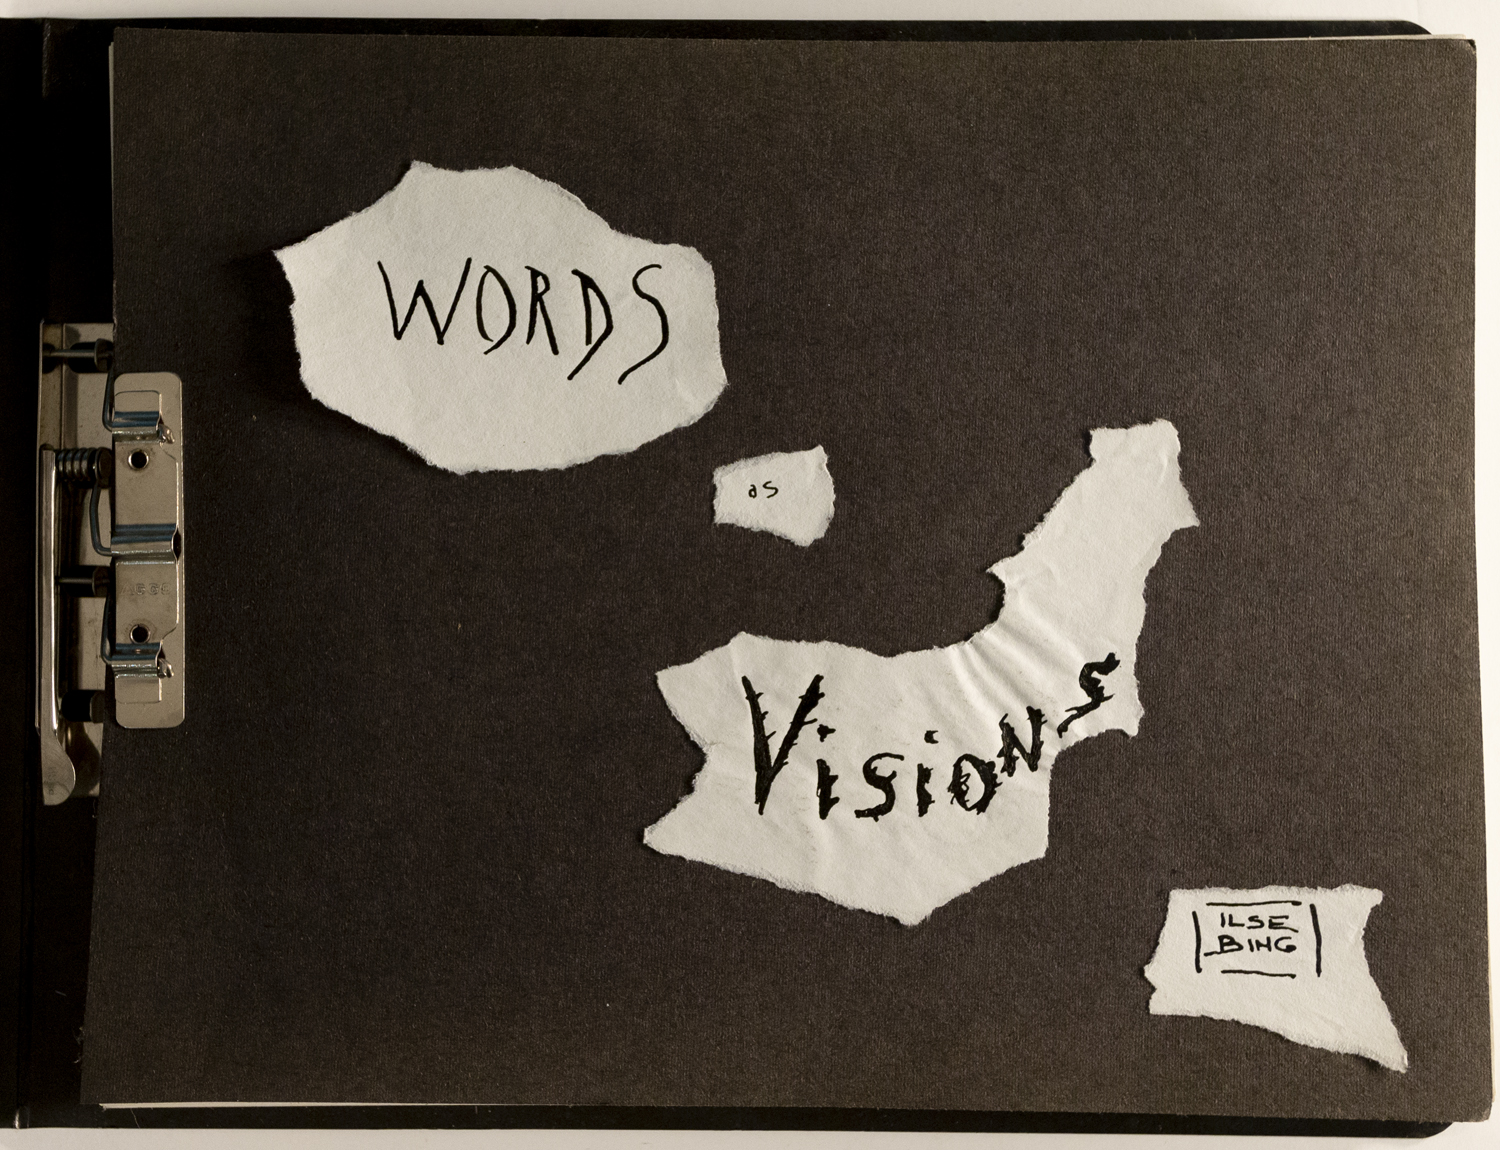 Words as Visions